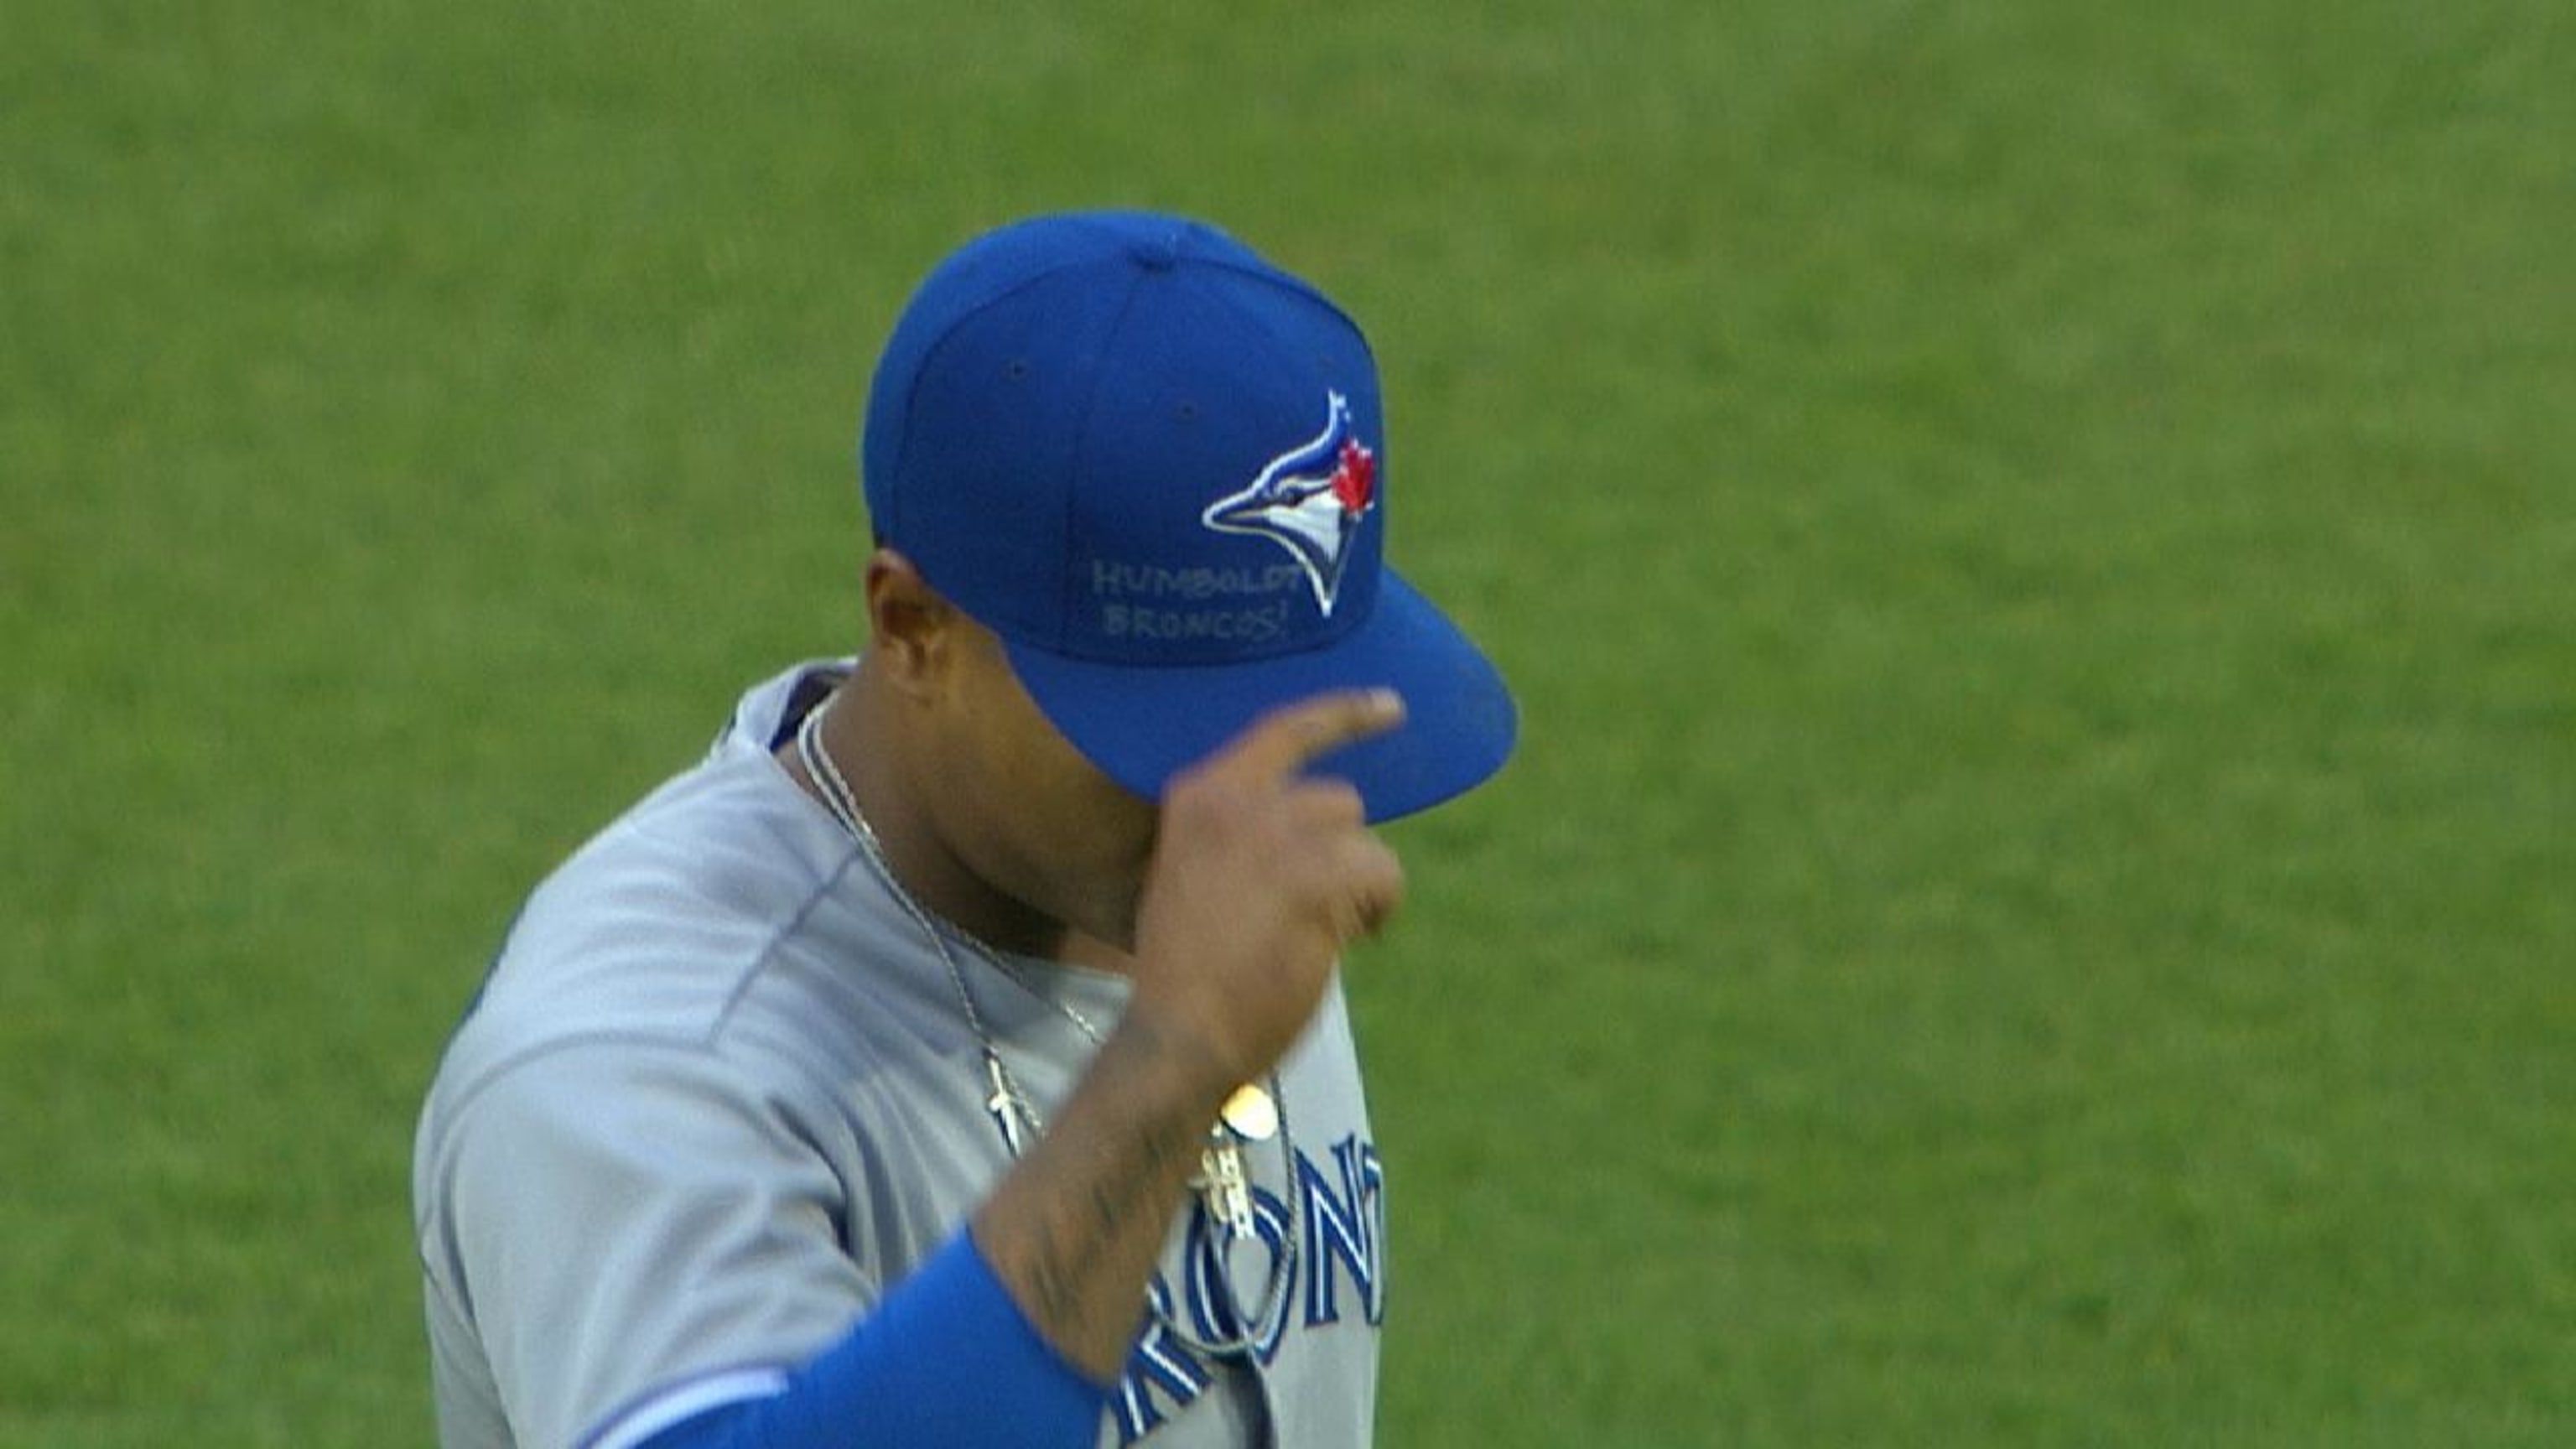 Marcus Stroman paid tribute to the Humboldt Broncos with messages on his  cap